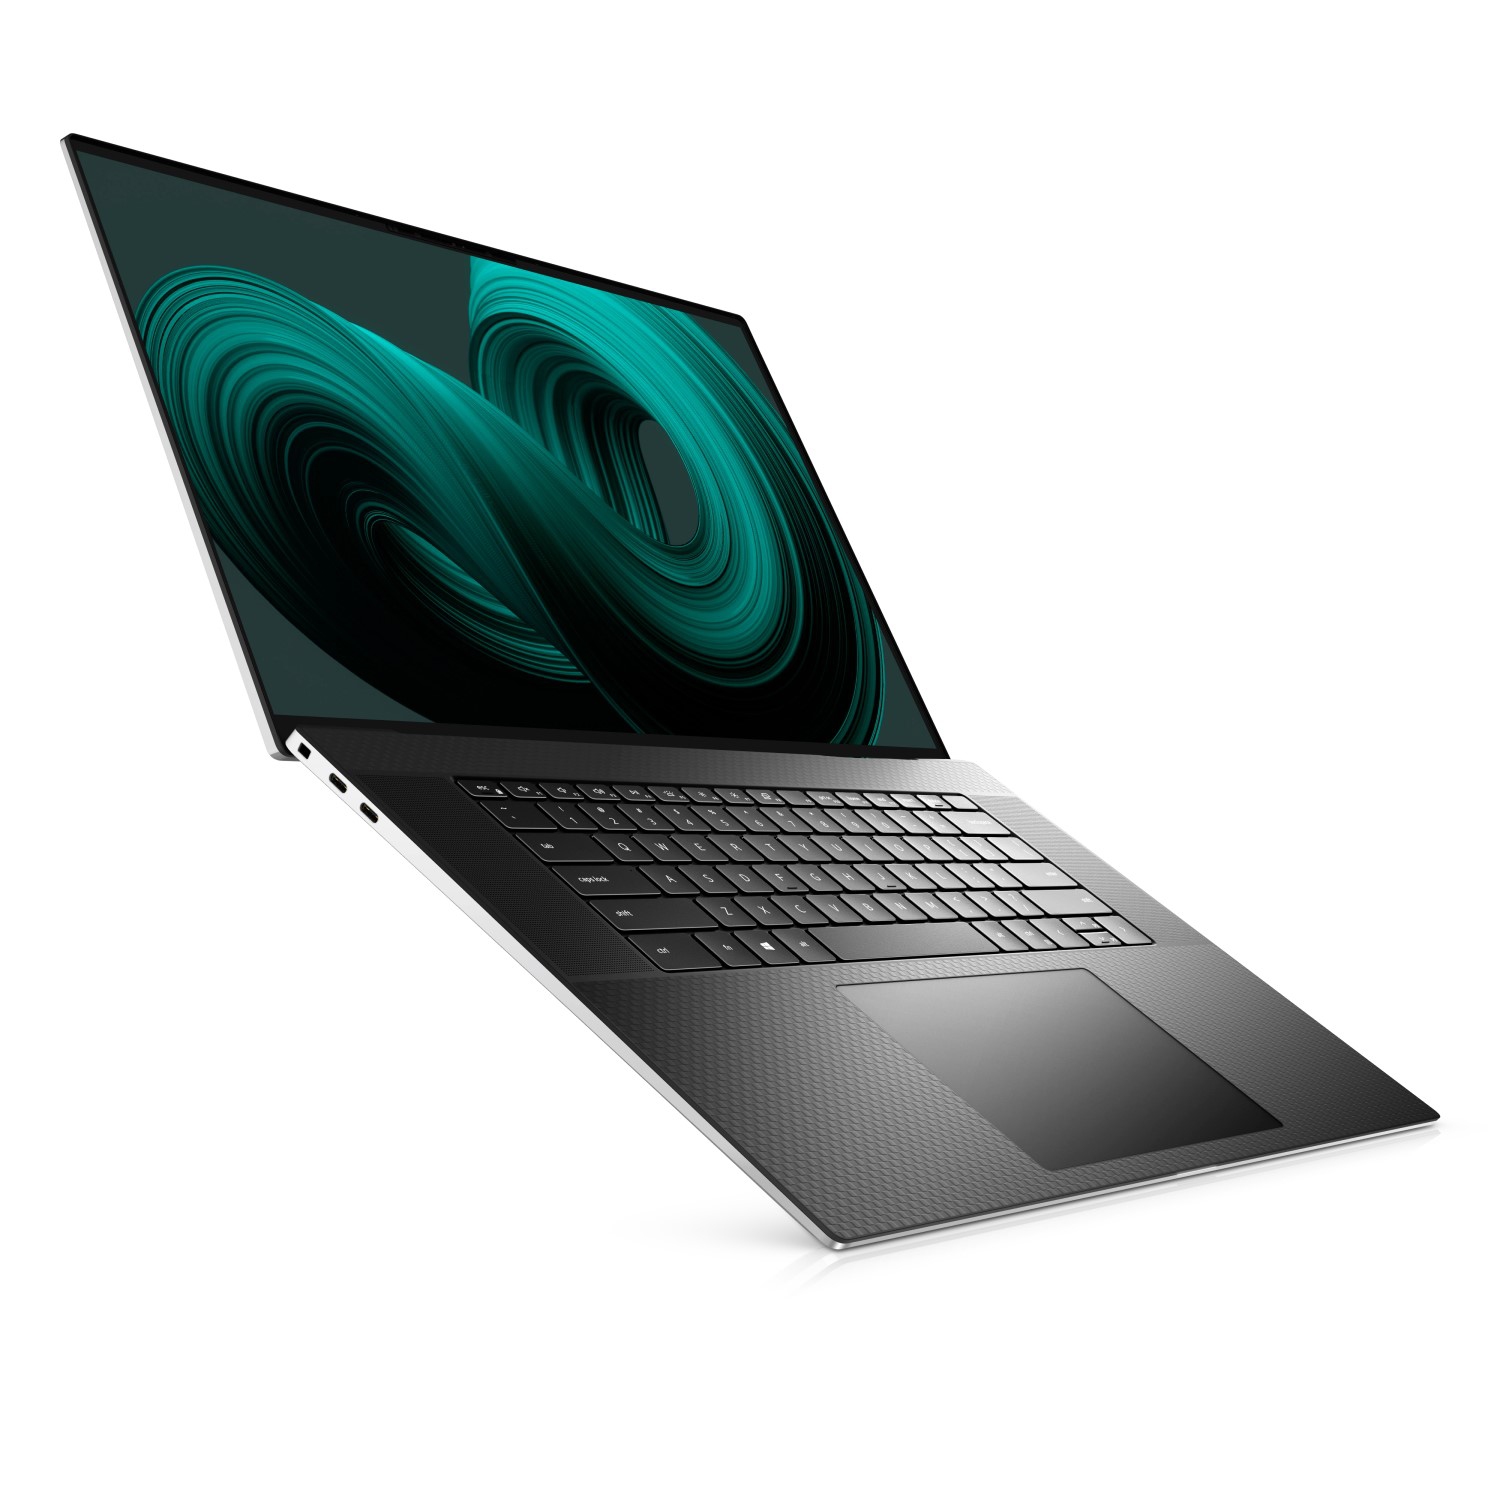 Refurbished (Excellent) - Dell XPS 17 9710, 17" UHD Touch, Nvidia RTX 3050, i7-11800H, 32GB RAM, 1TB SSD, WIN 10 Home - Certified Refurbished